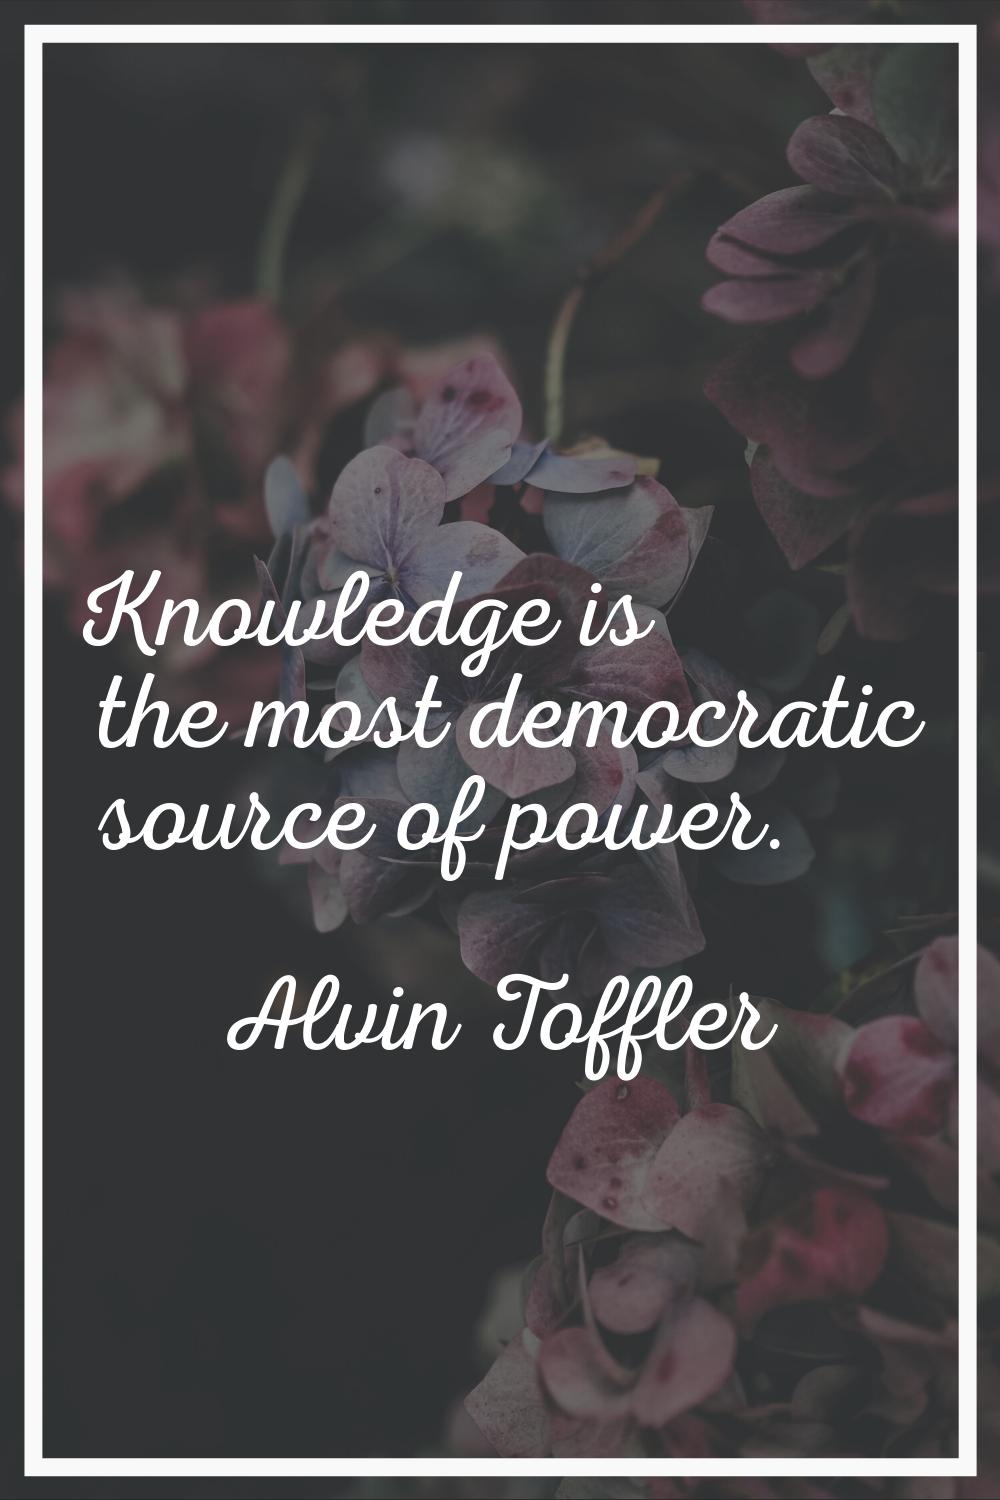 Knowledge is the most democratic source of power.